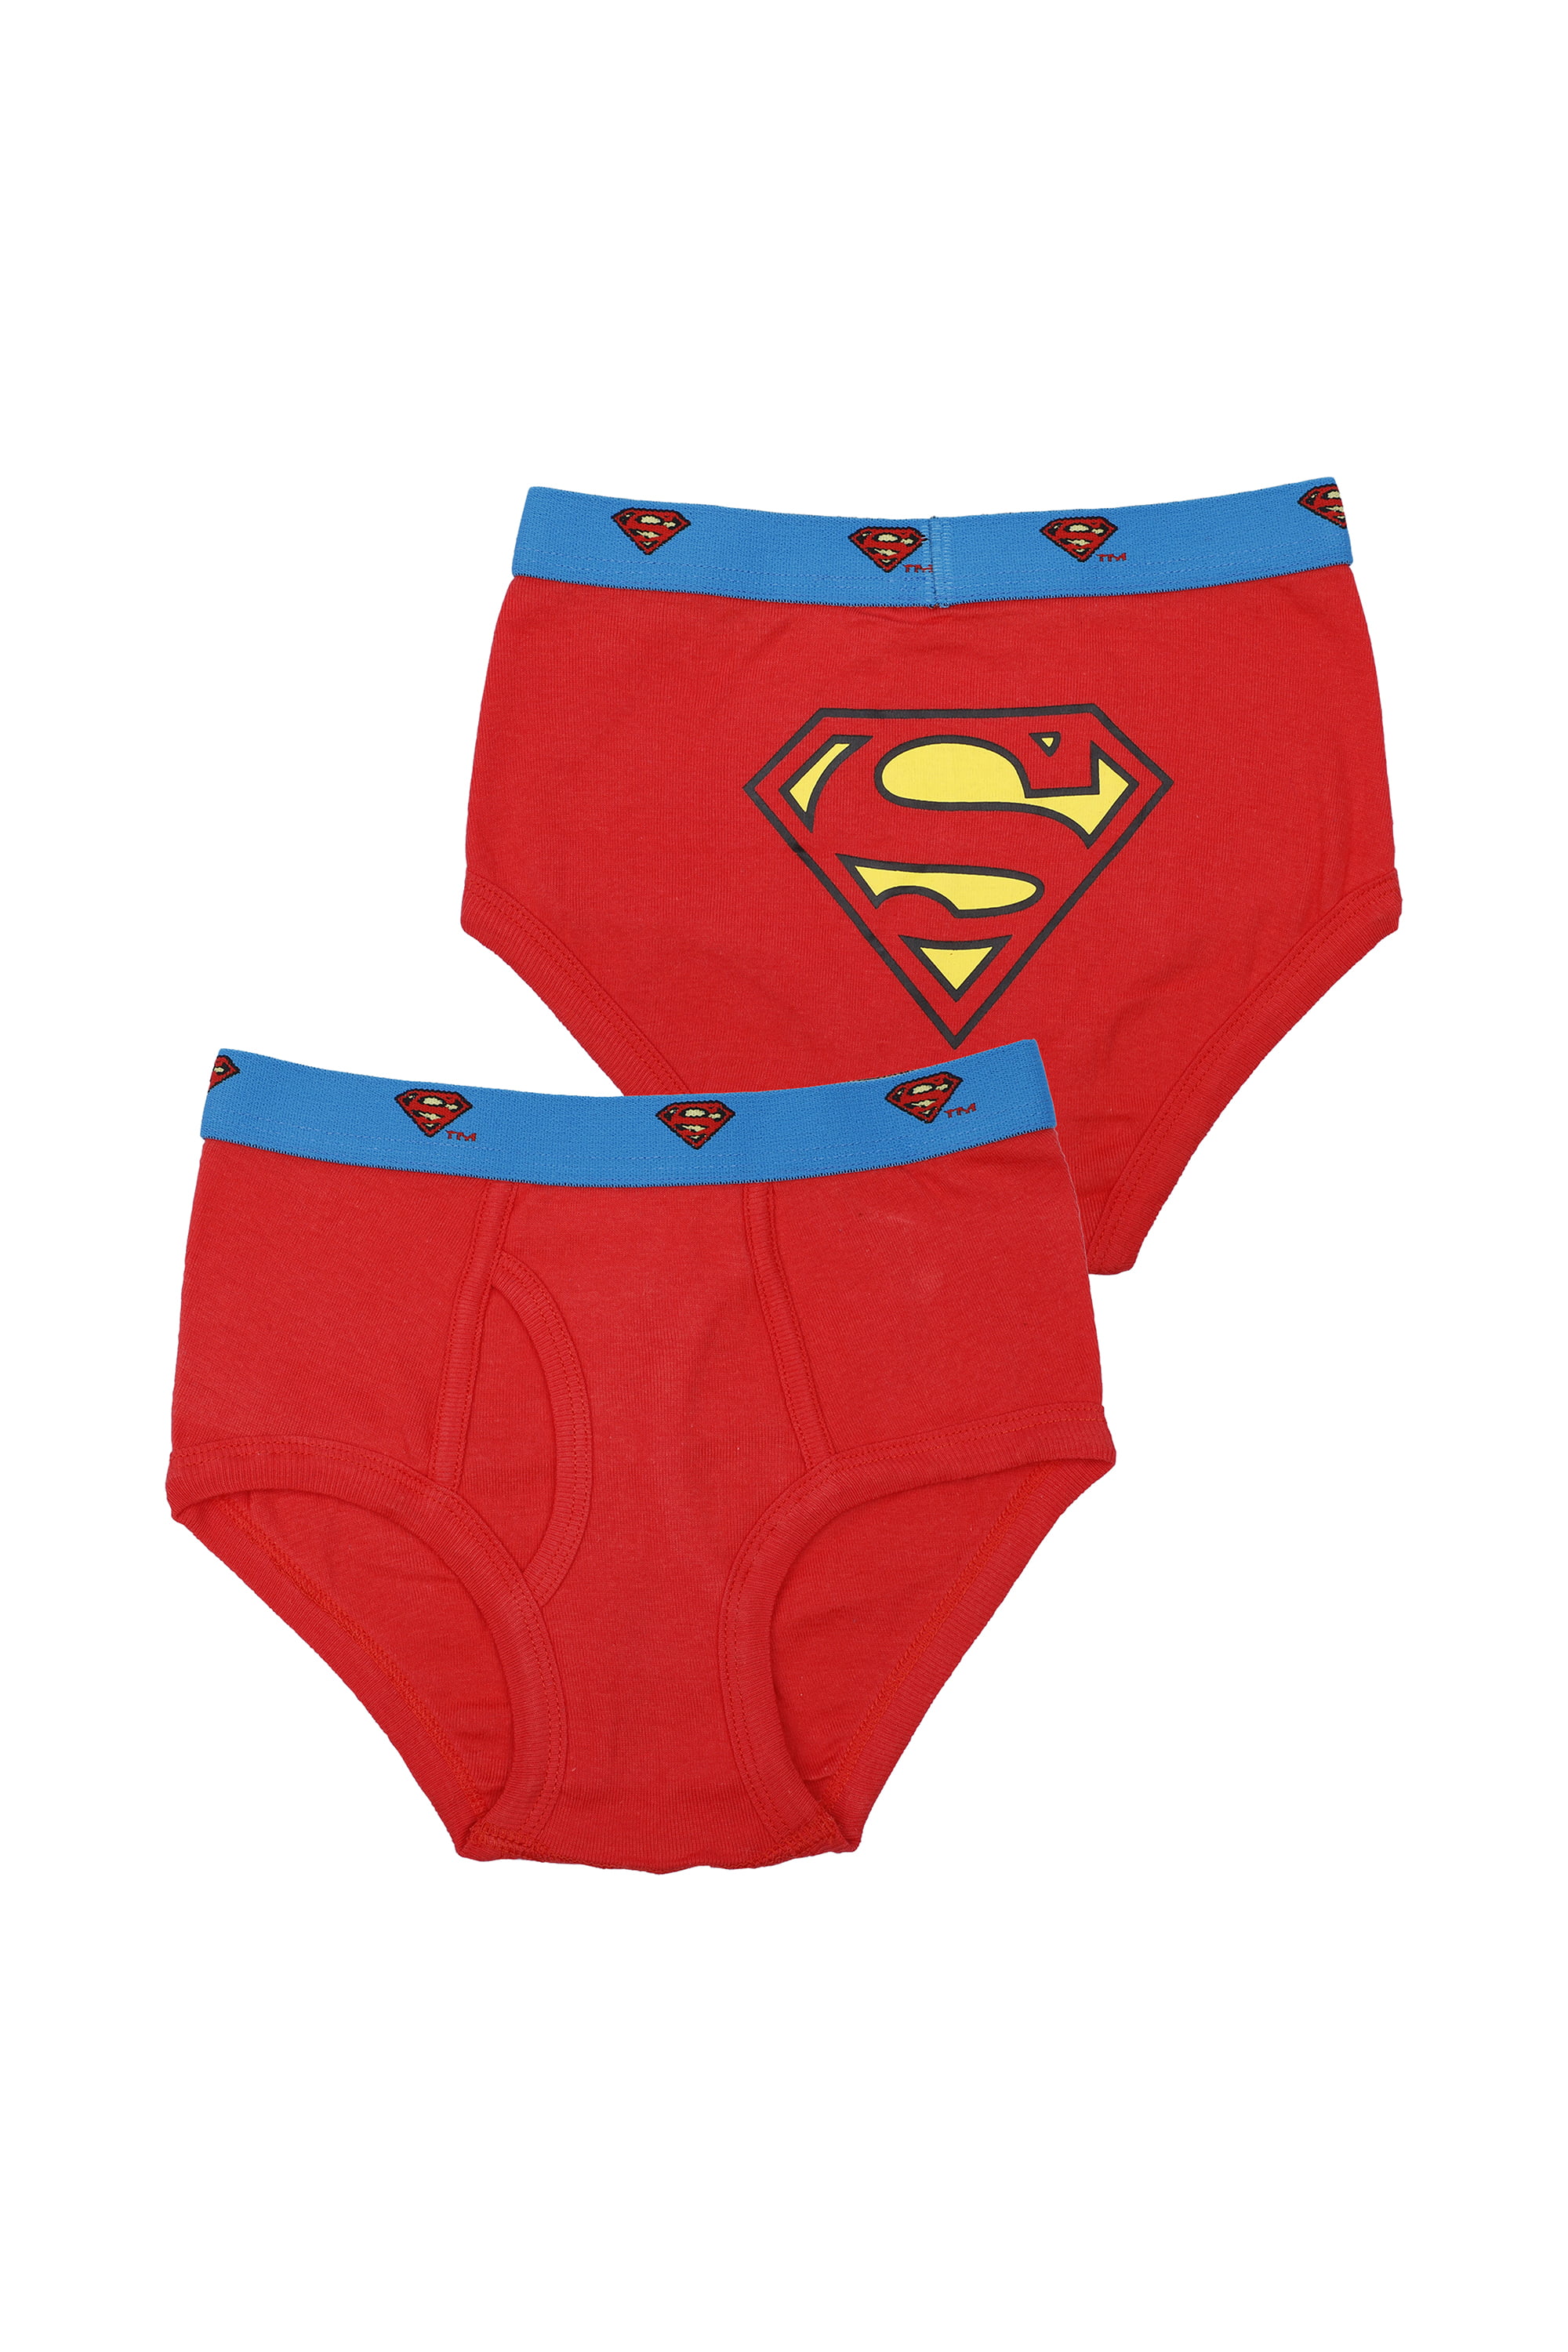 New 3 Pack Boys Man Of Steel Superman 100% Cotton Briefs Age 6-8 Years 